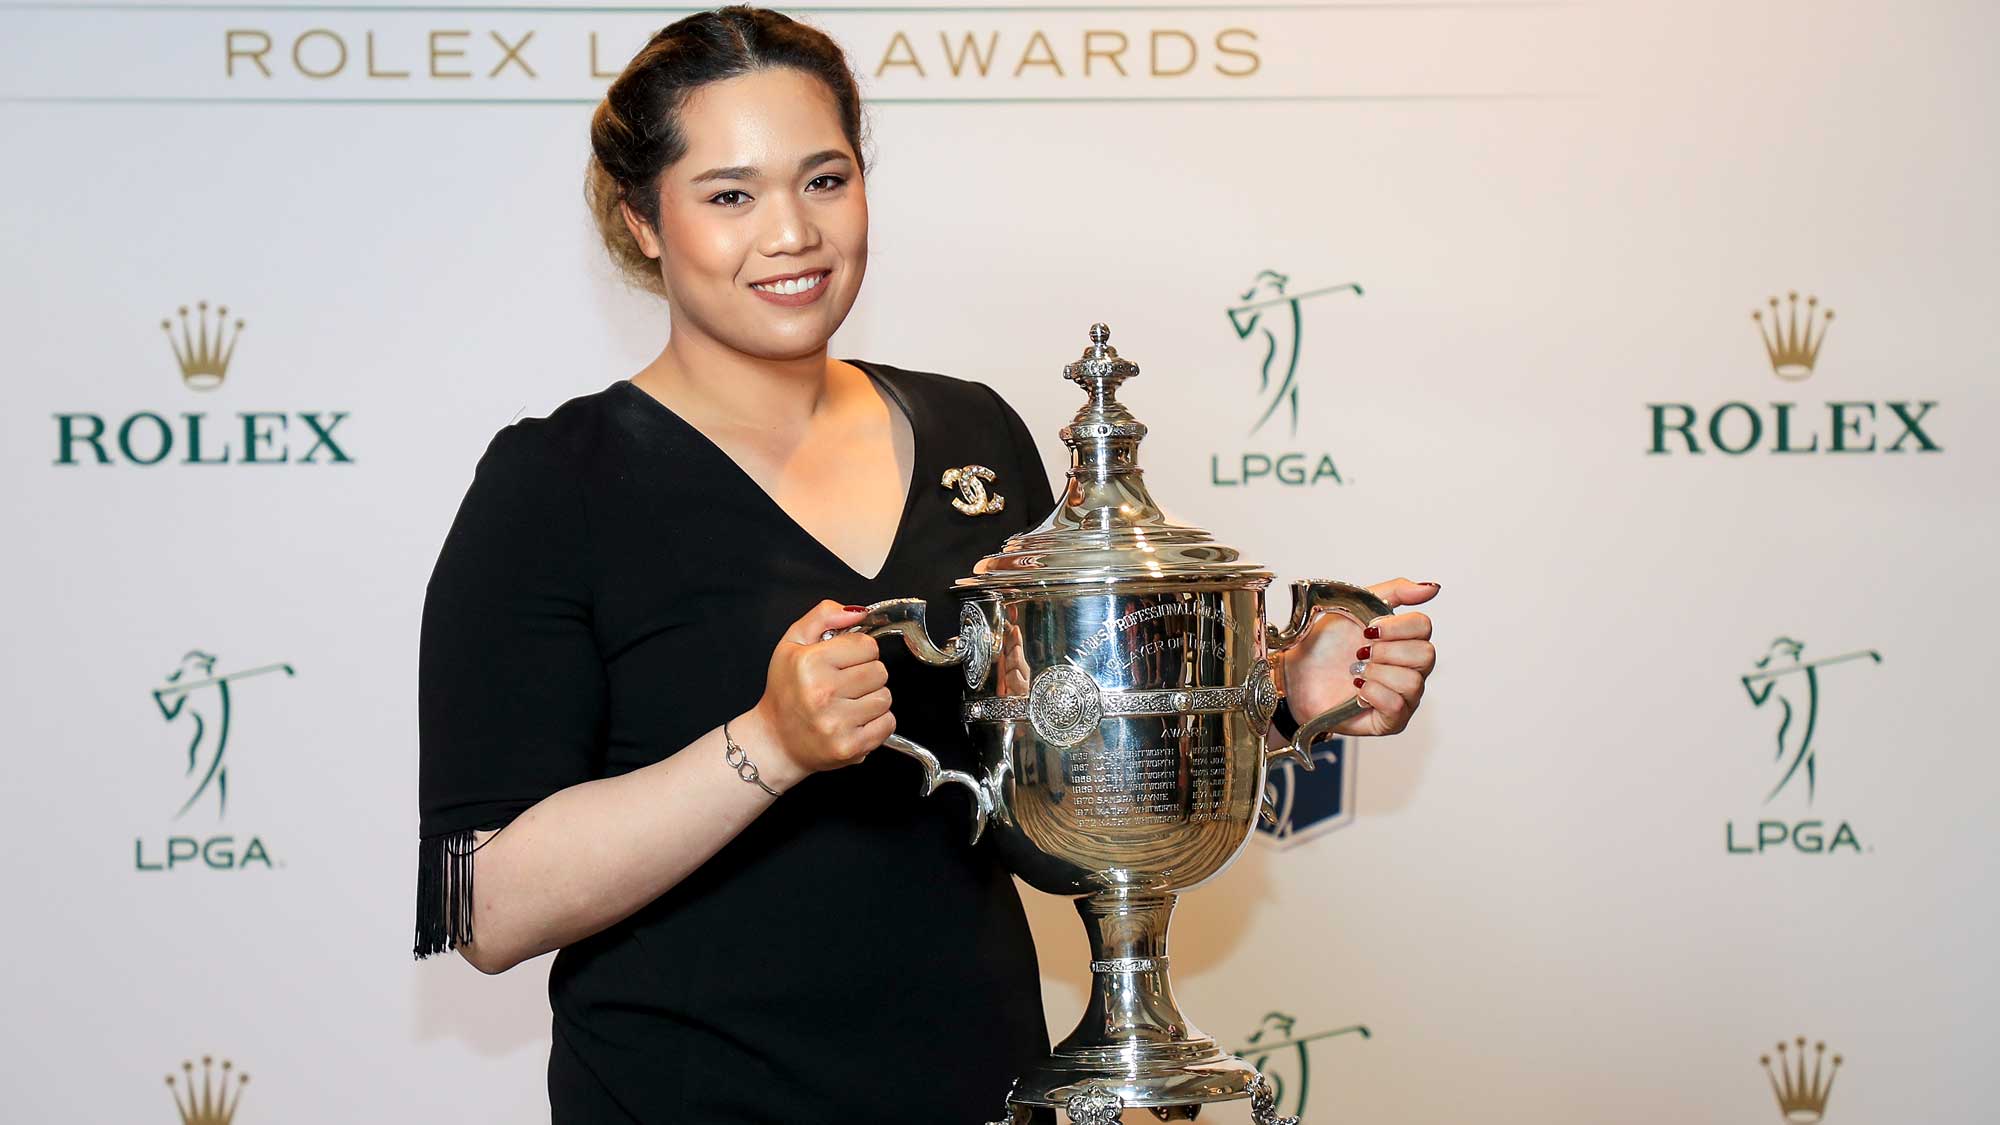 Ariya Jutanugarn of Thailand poses with the Rolex Player of the Year trophy after the LPGA Rolex Players Awards at the Ritz-Carlton Golf Resort